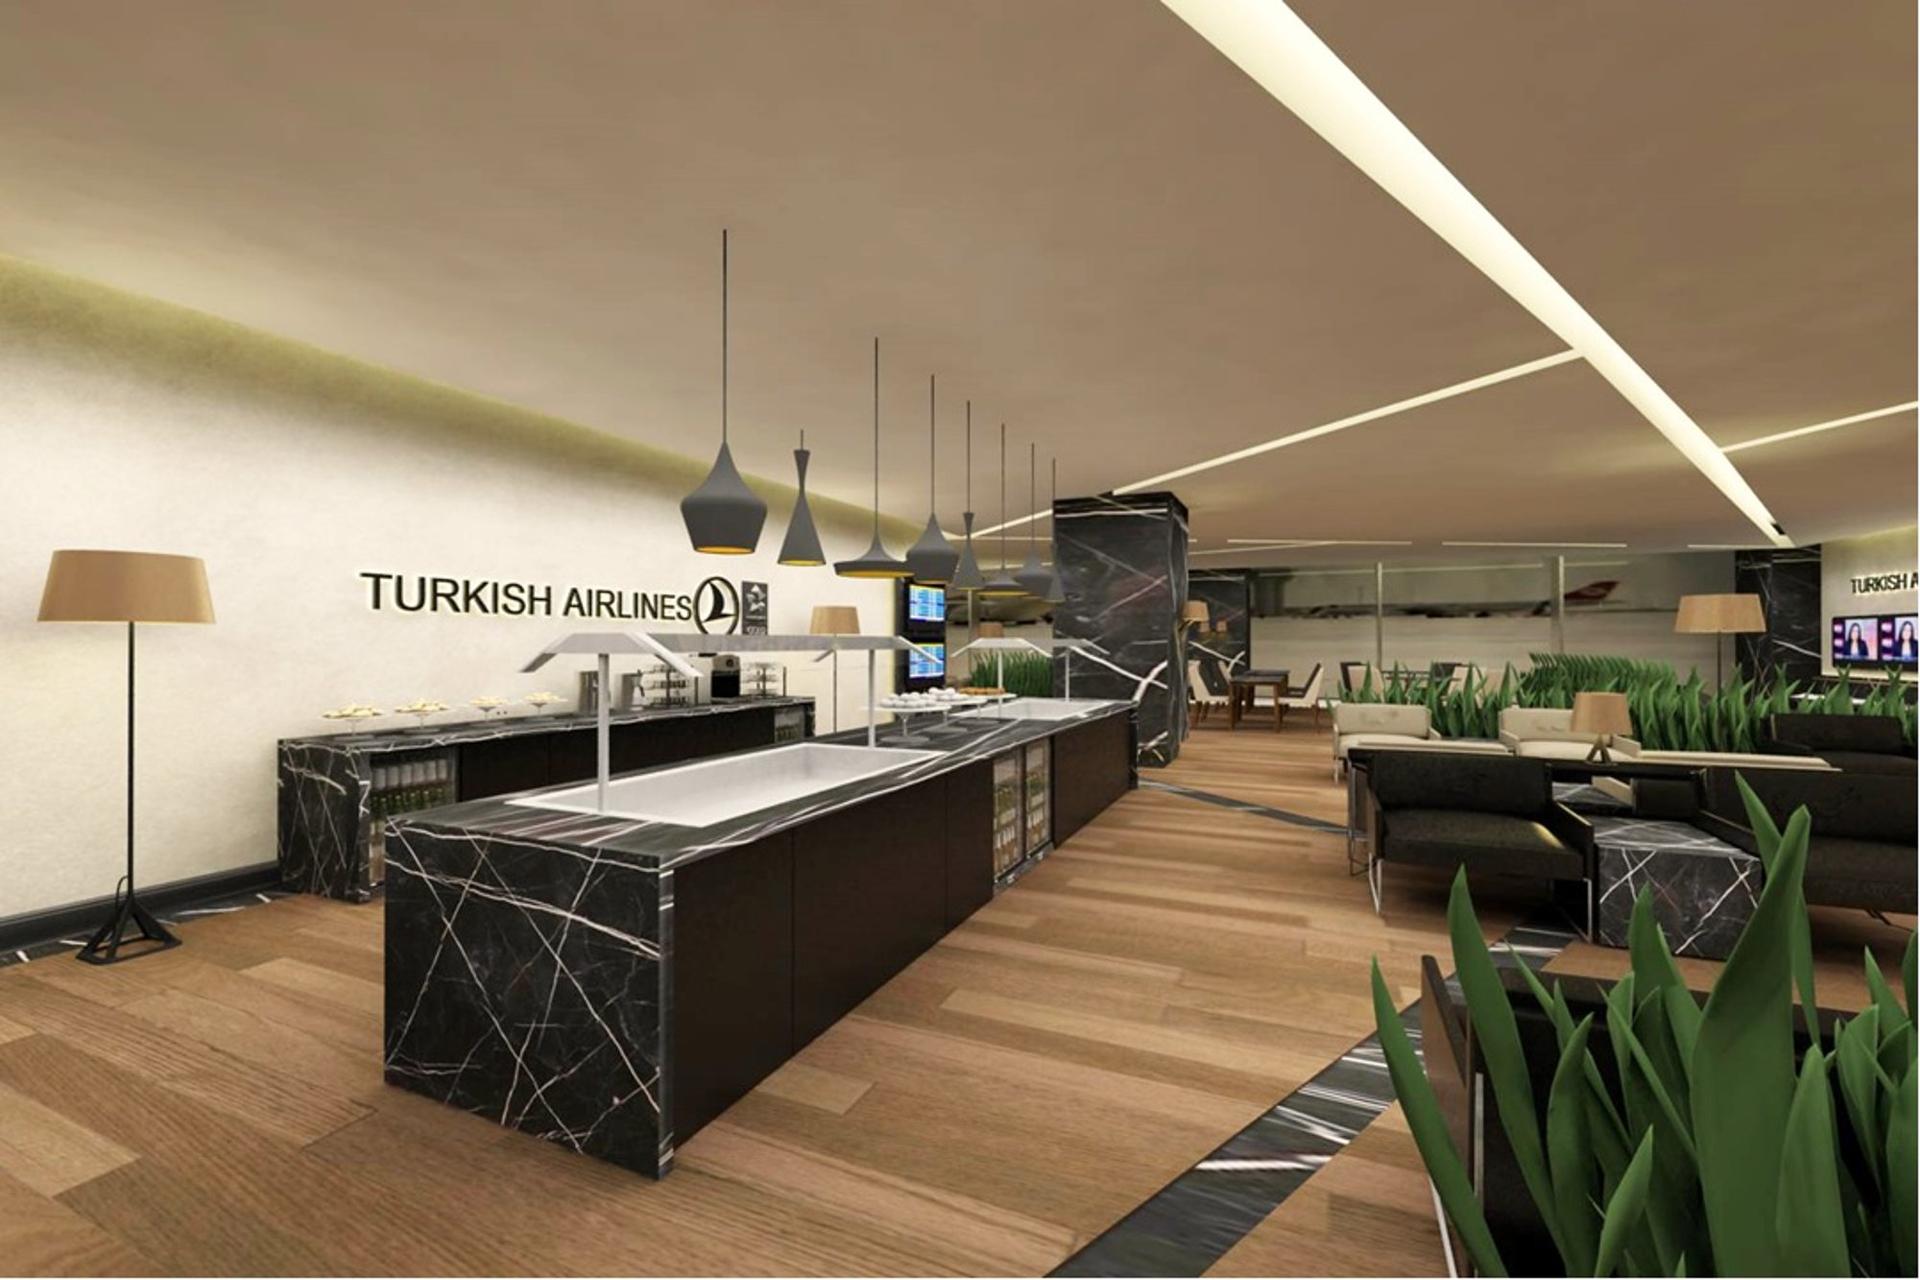 Turkish Airlines CIP Lounge (Business Lounge) image 11 of 27